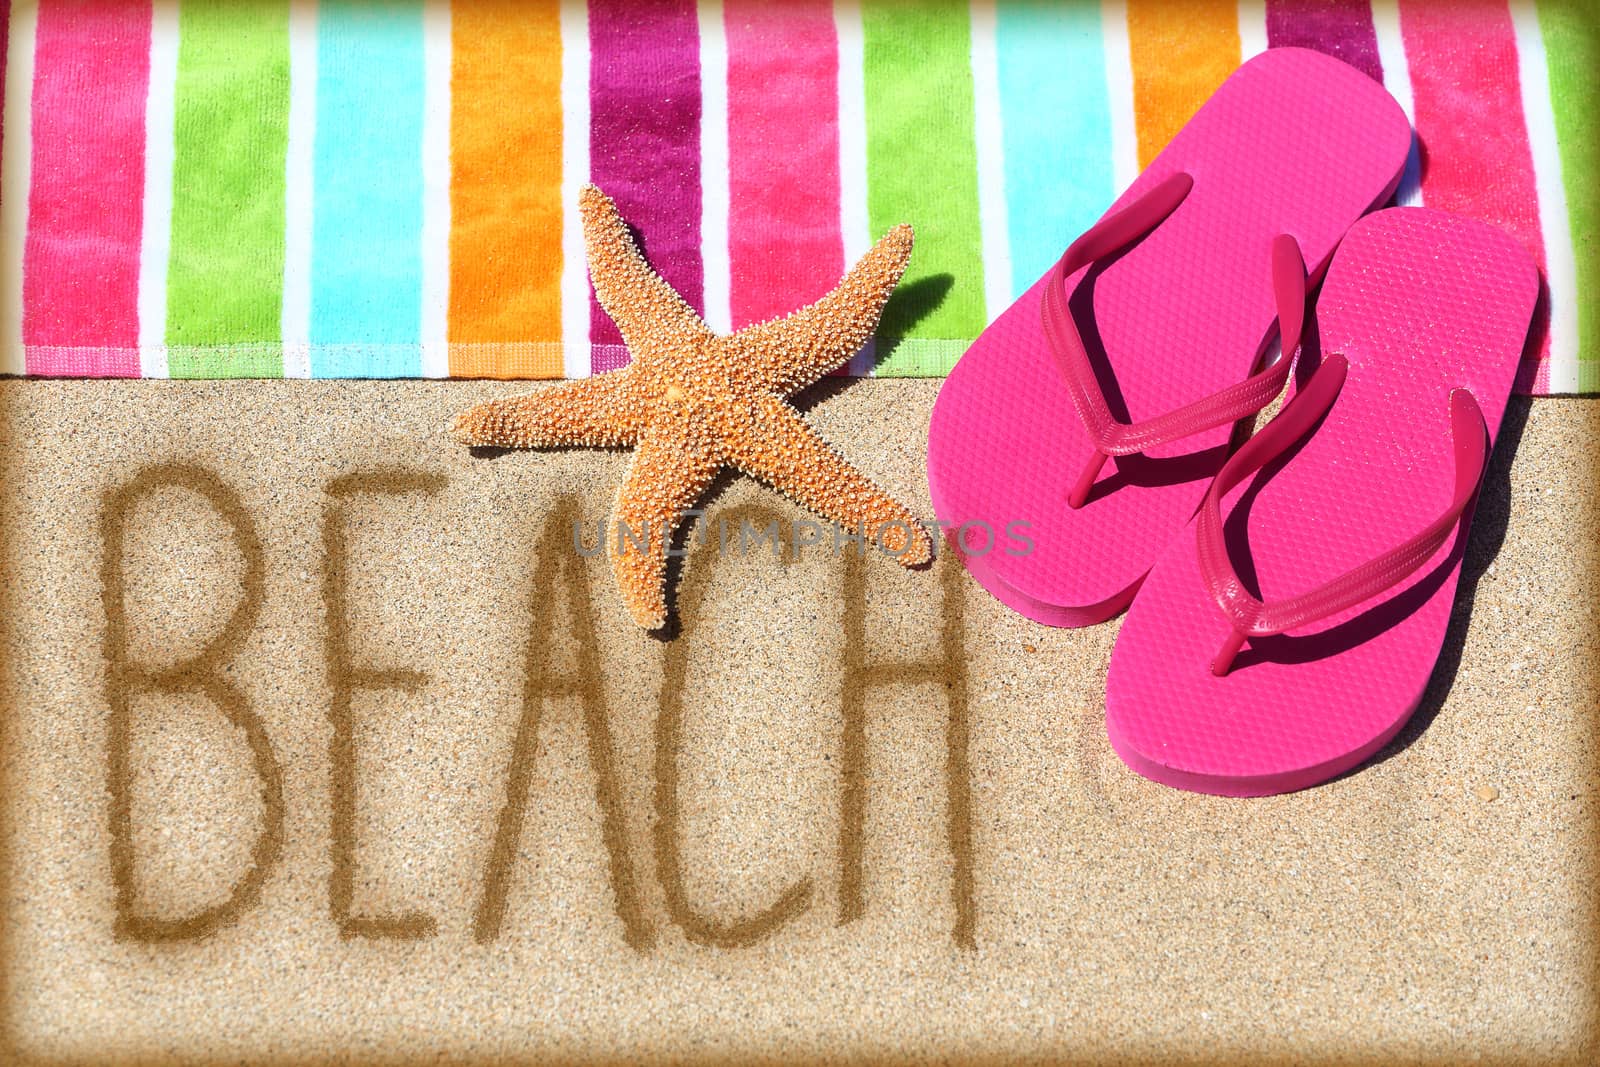 Beach vacation concept - word written on golden sand with a starfish, pink flip flops and towel conceptual of a summer vacation and travel to a sunny destination for a relaxing suntan.